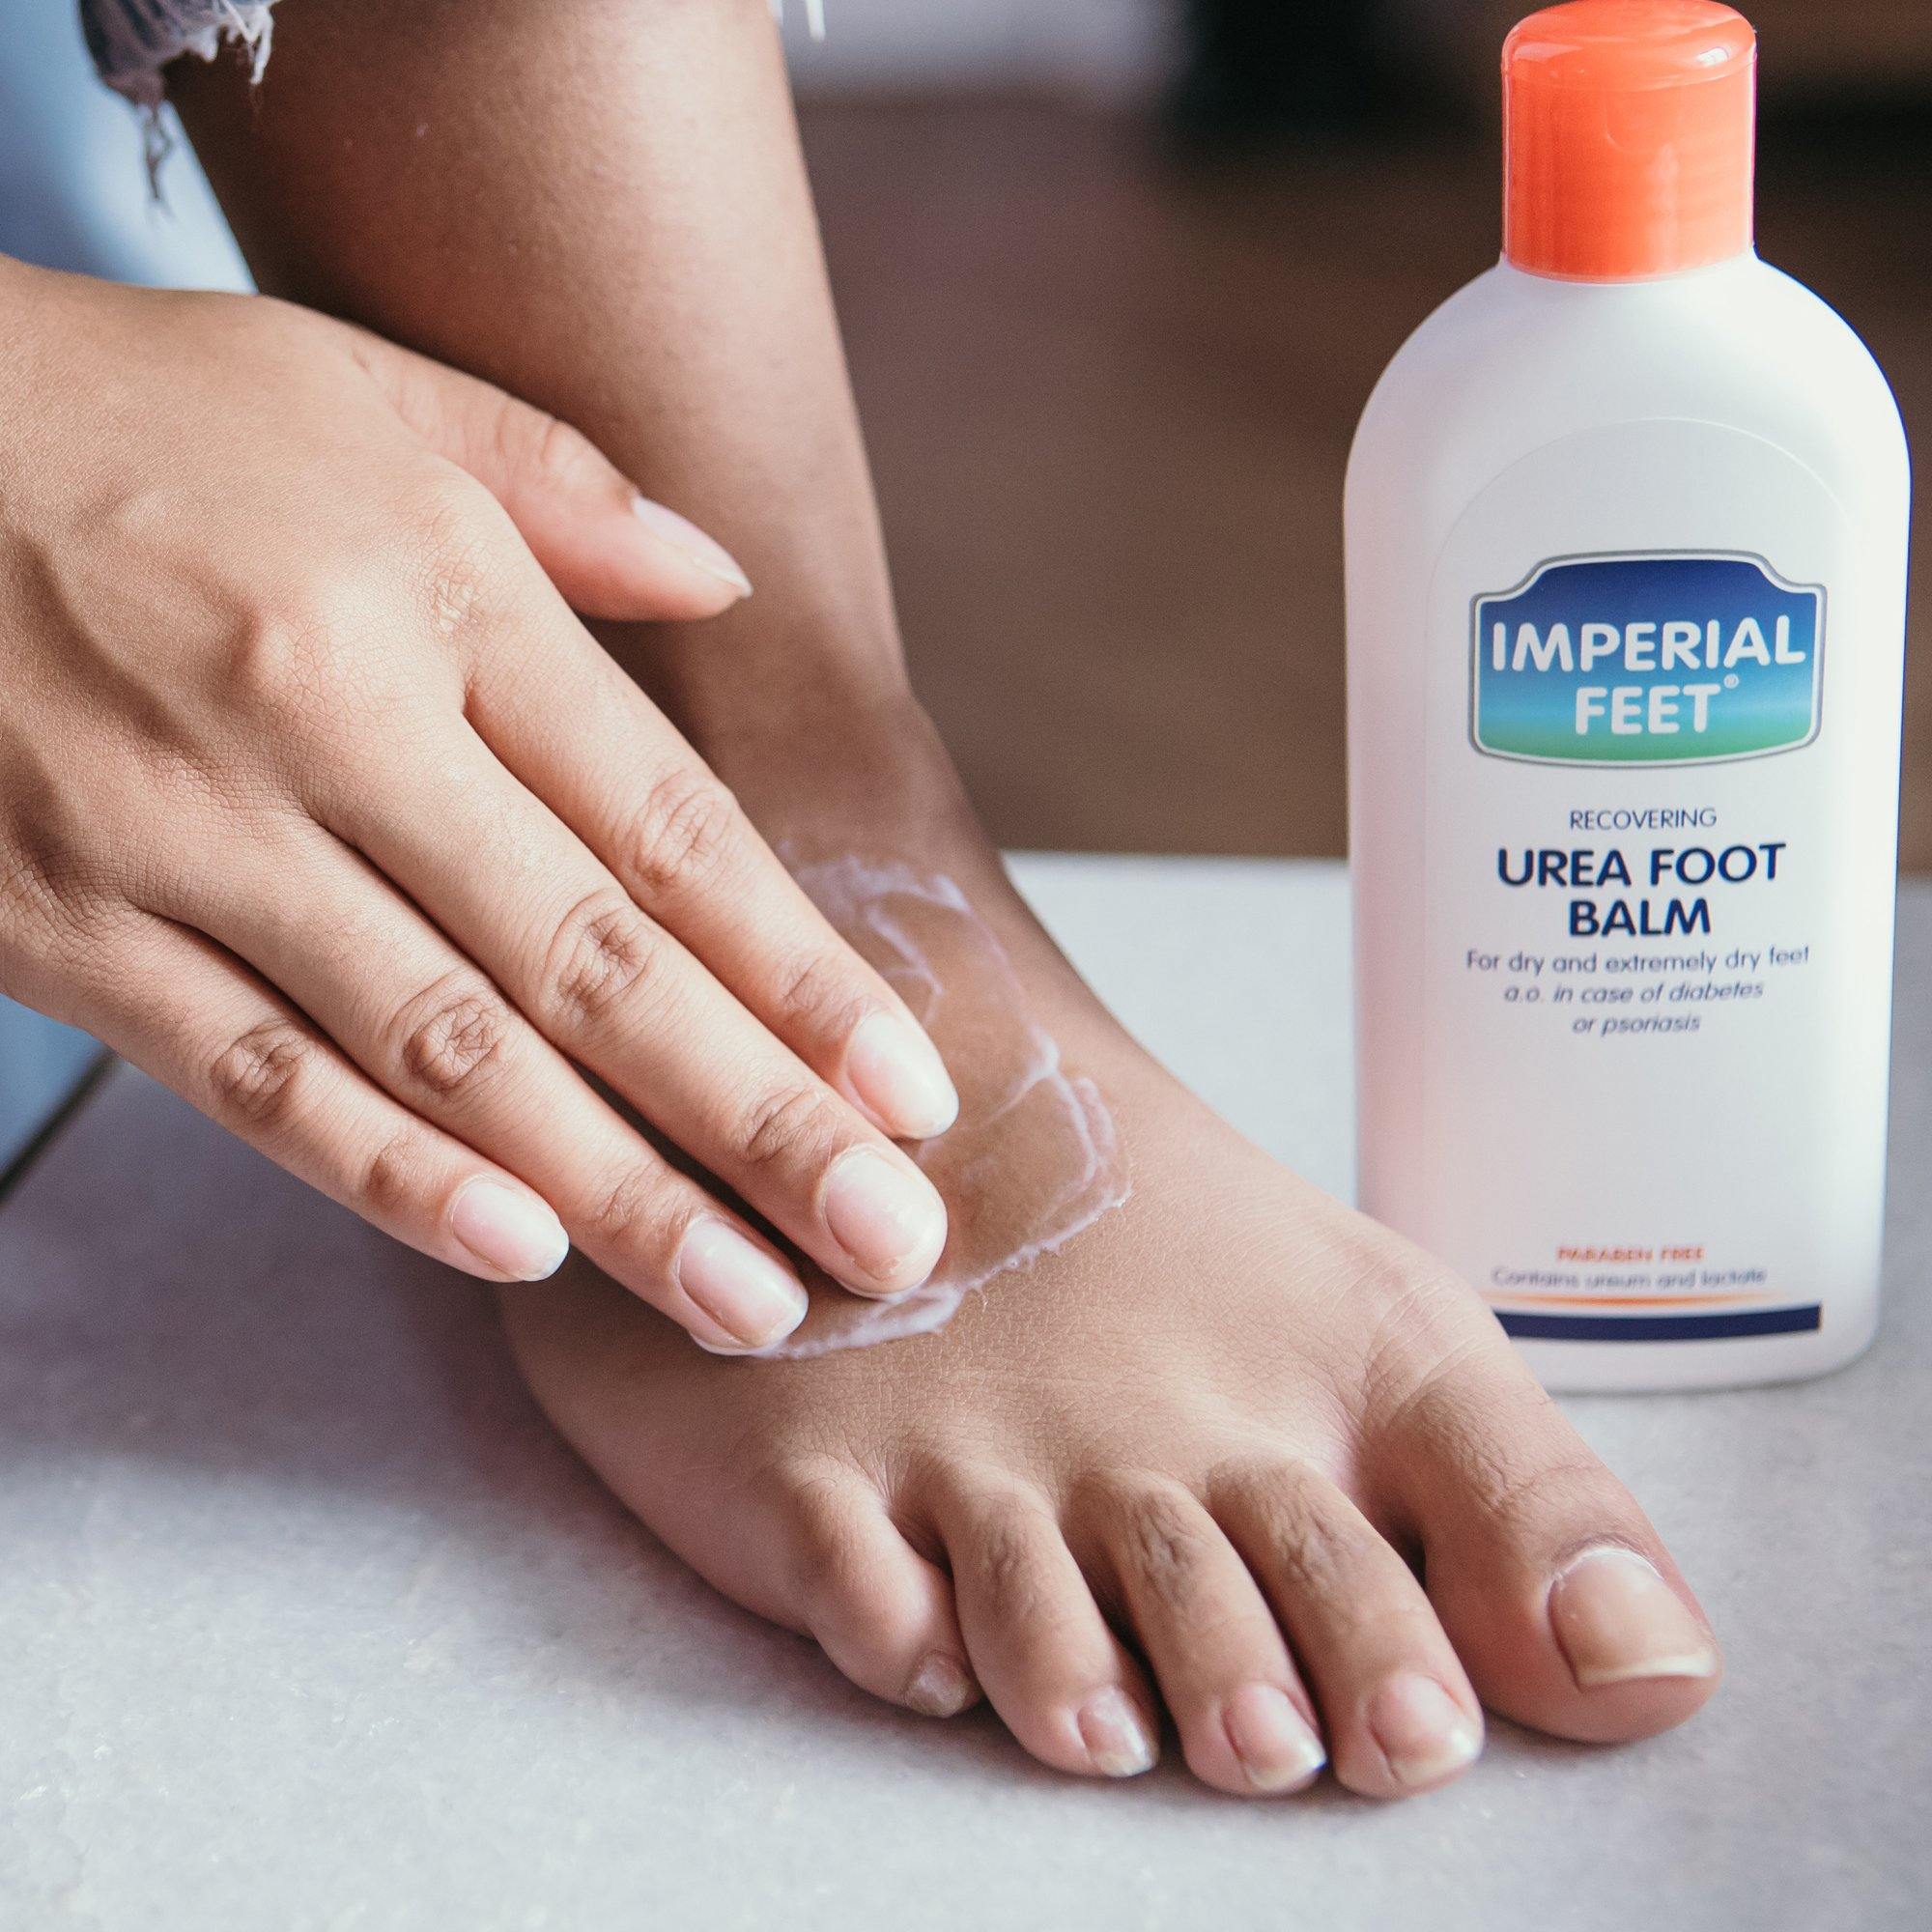 Urea Foot Balm - Imperial Feet - Foot care products - B2C, Dry and Cracked Feet